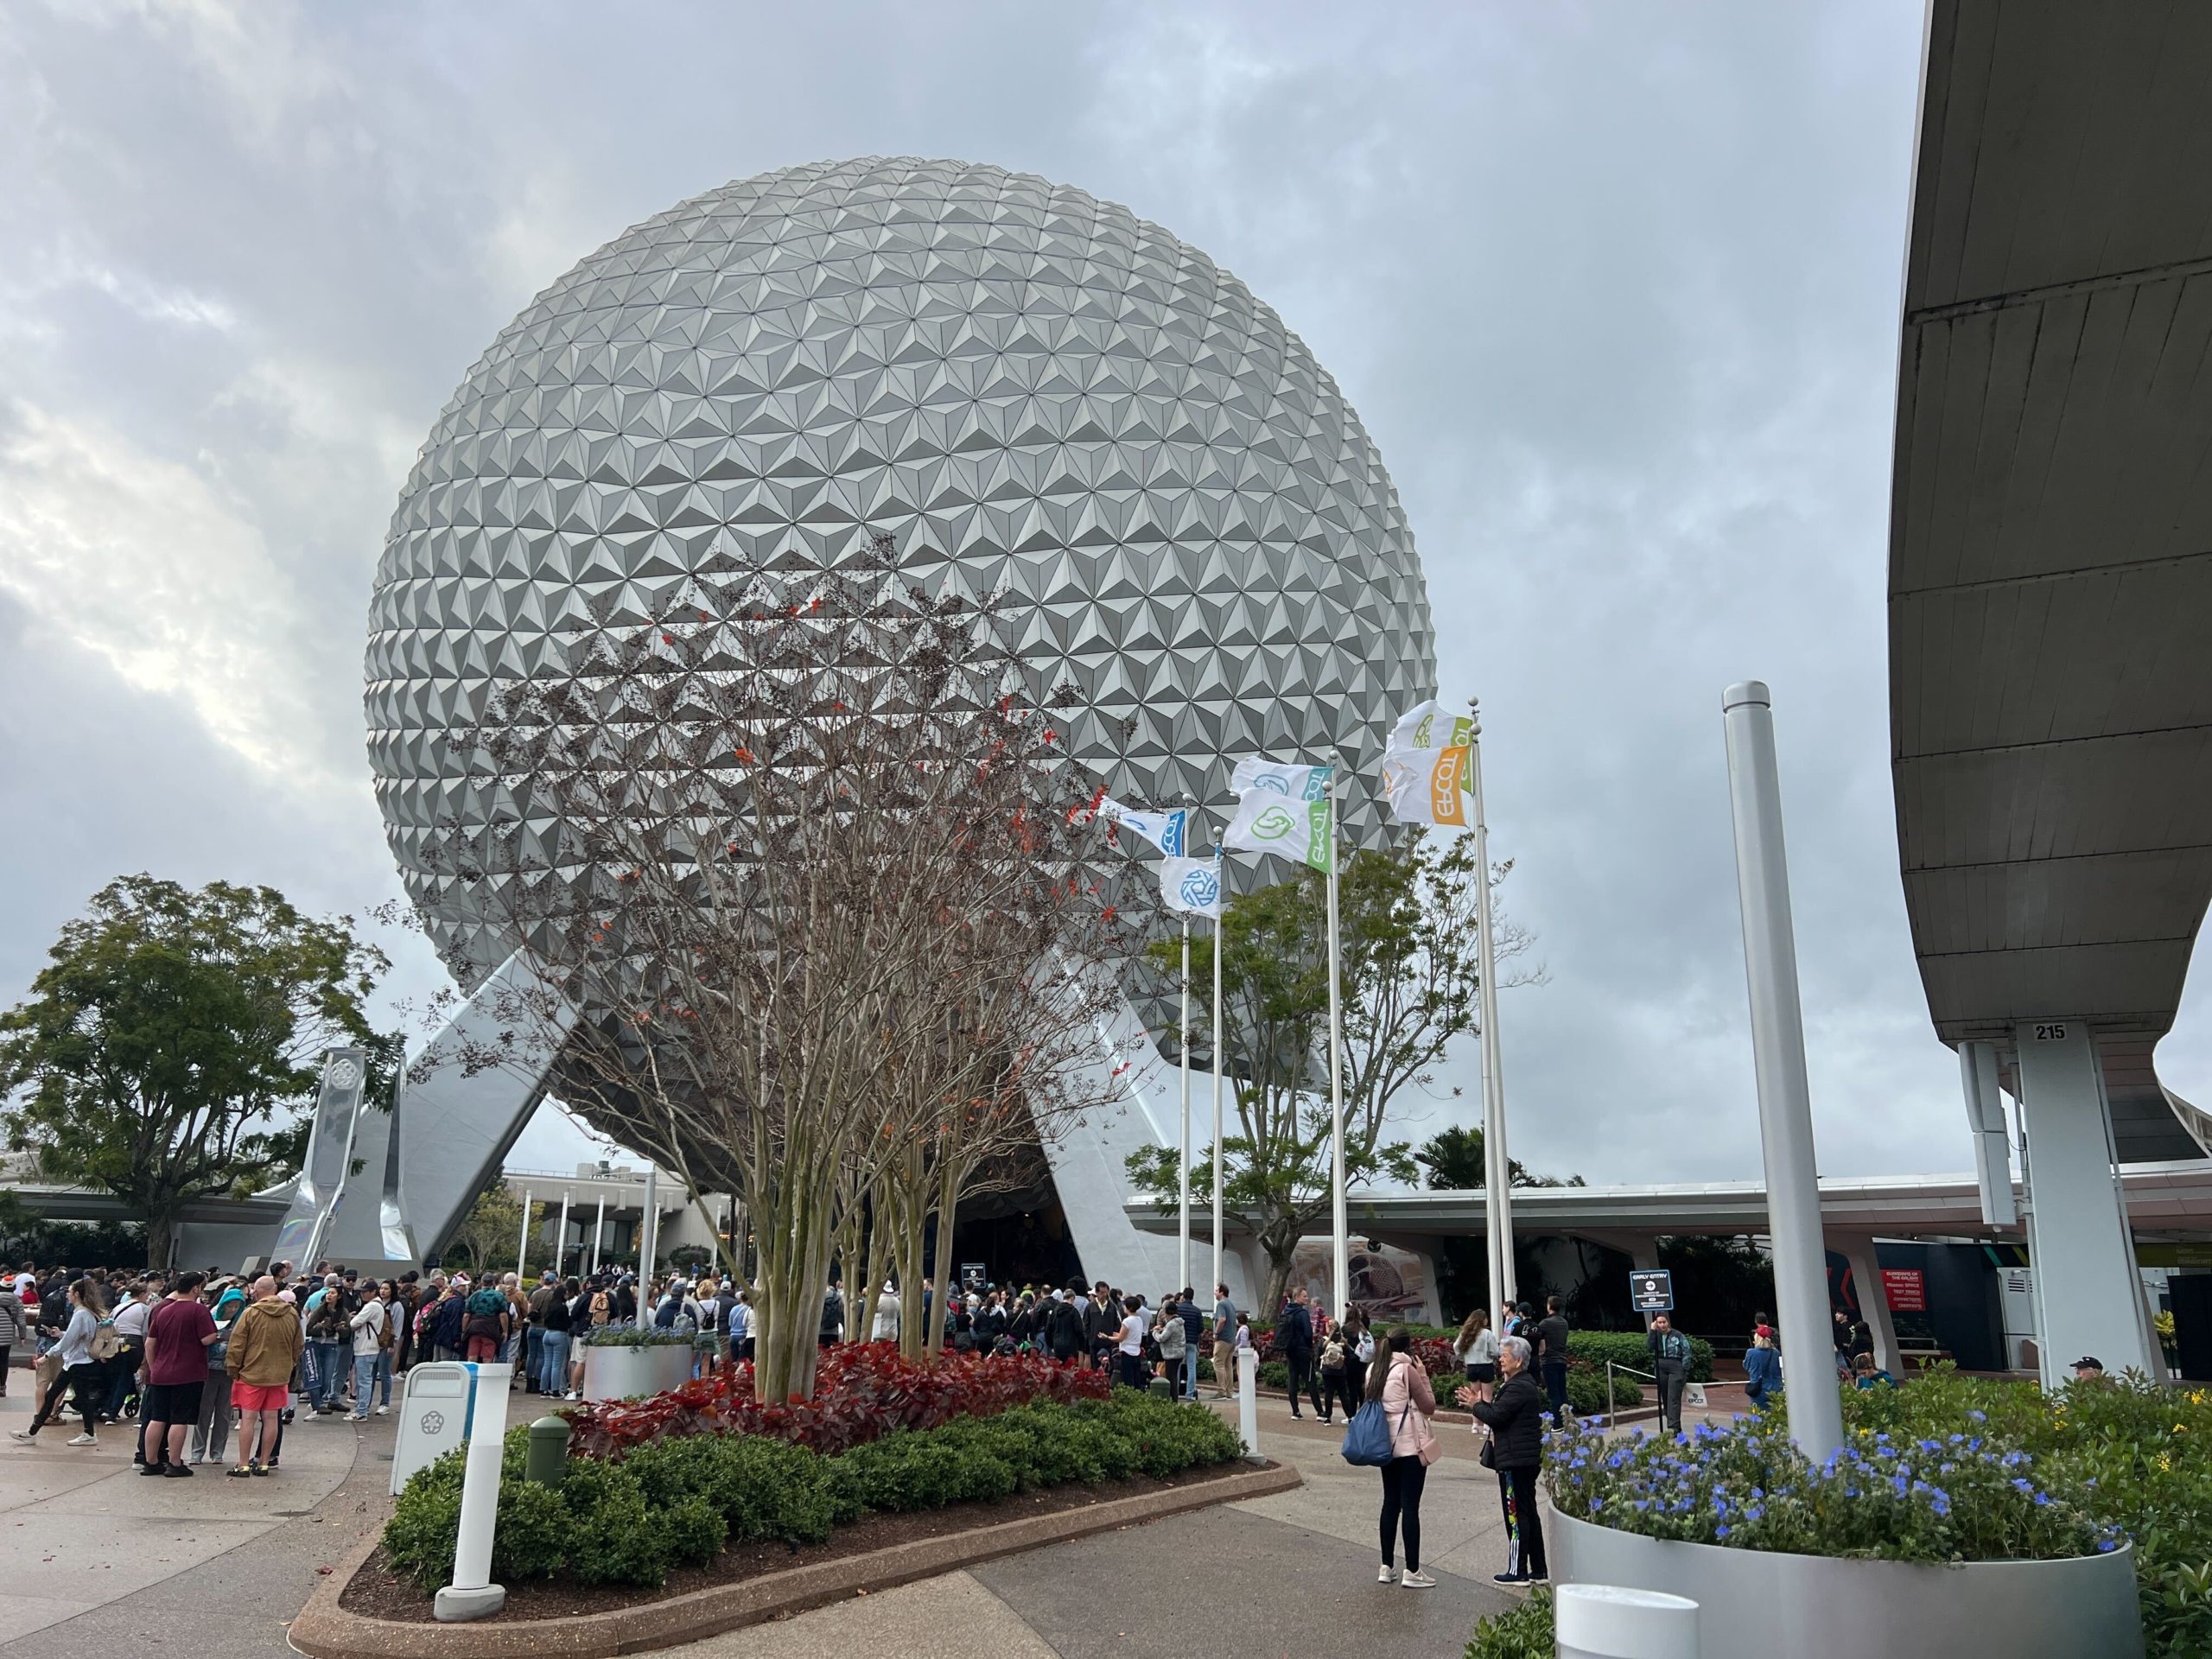 Spaceship Earth in EPCOT